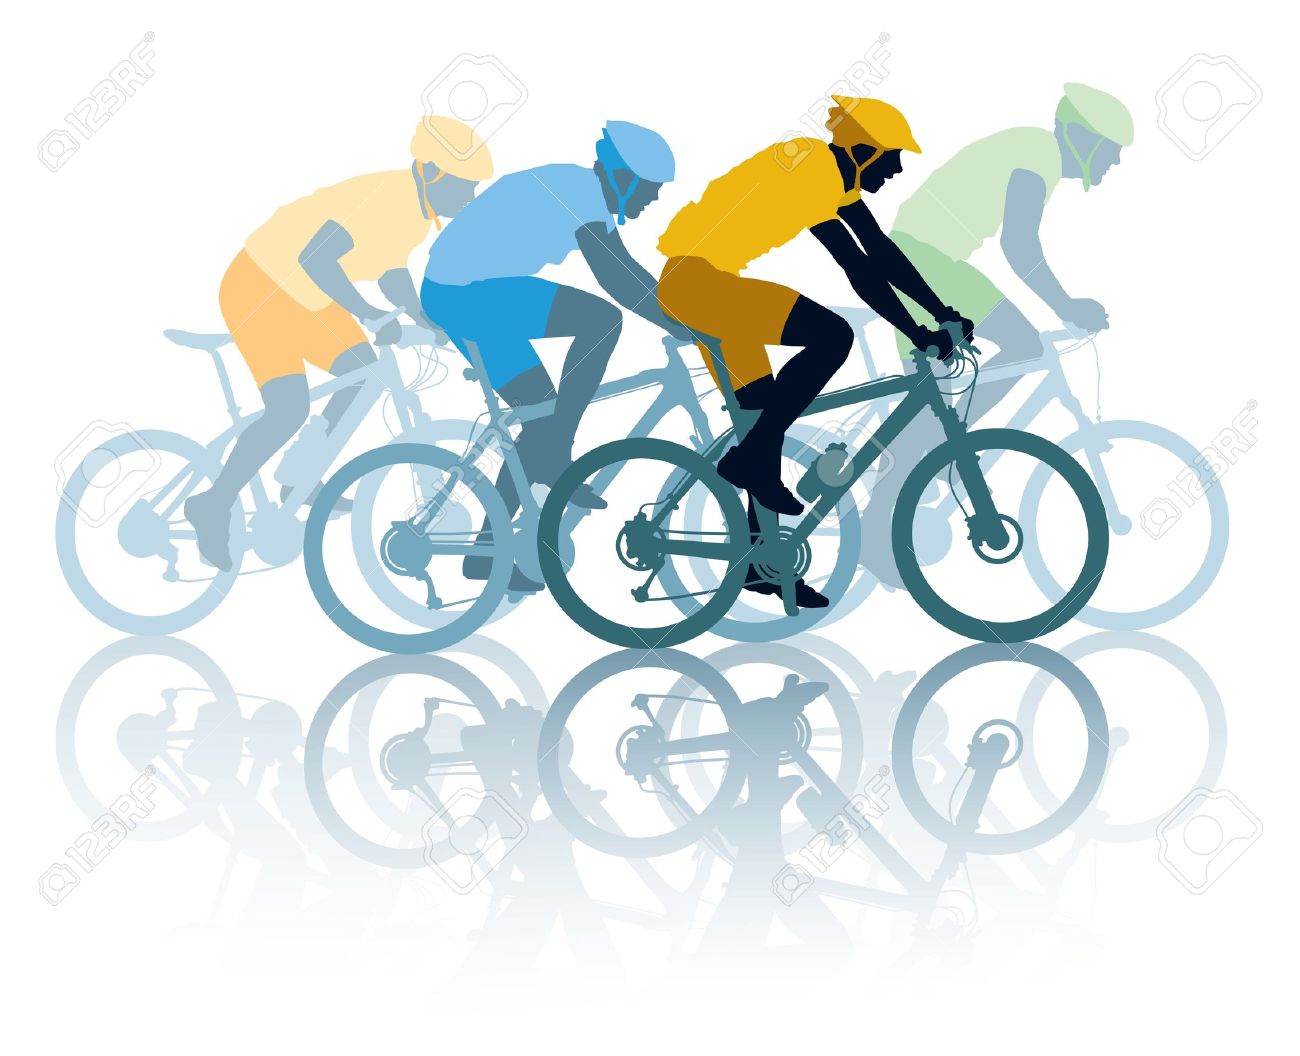 Cycle Race Clipart.